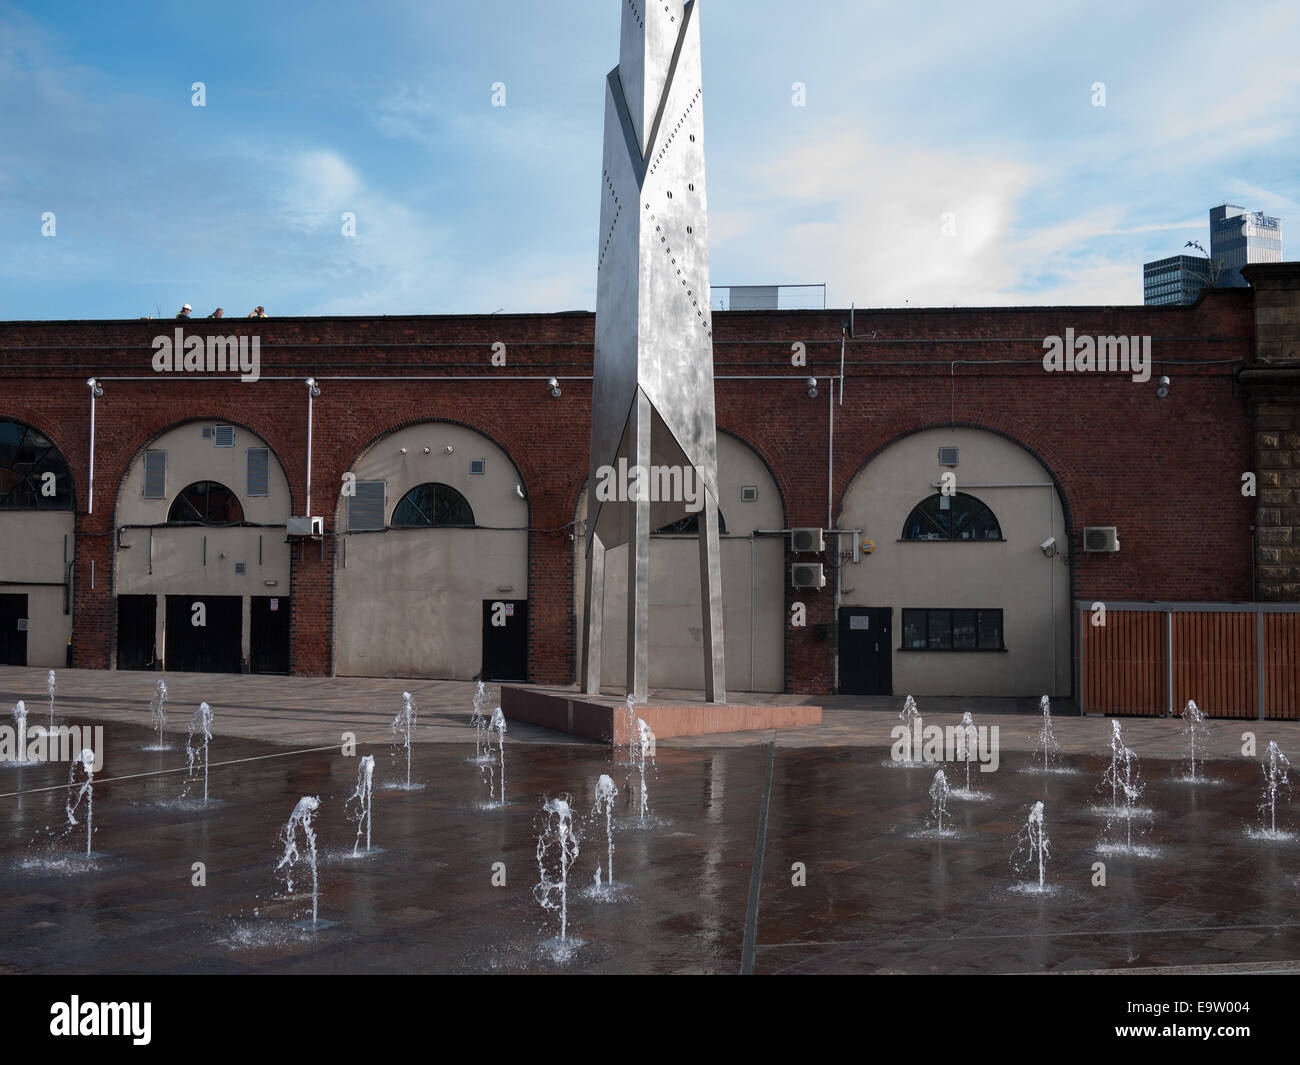 Greengate Square fountains, Salford Stock Photo